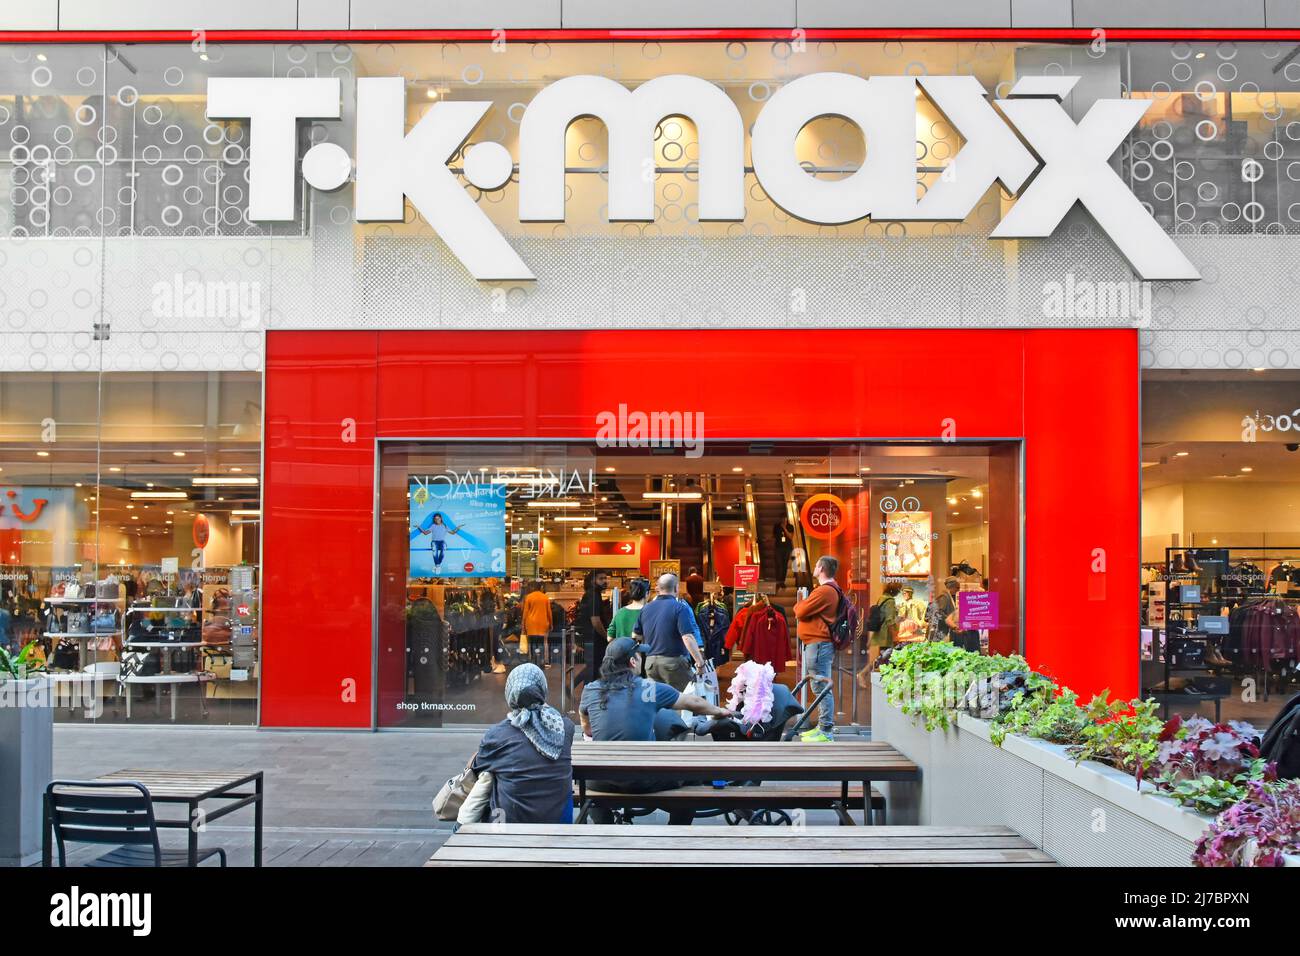 Busy TK Maxx retail clothing business shoppers & red shop front in the  UK Stratford Westfield shopping centre Mall T K Maxx store sign above entrance Stock Photo